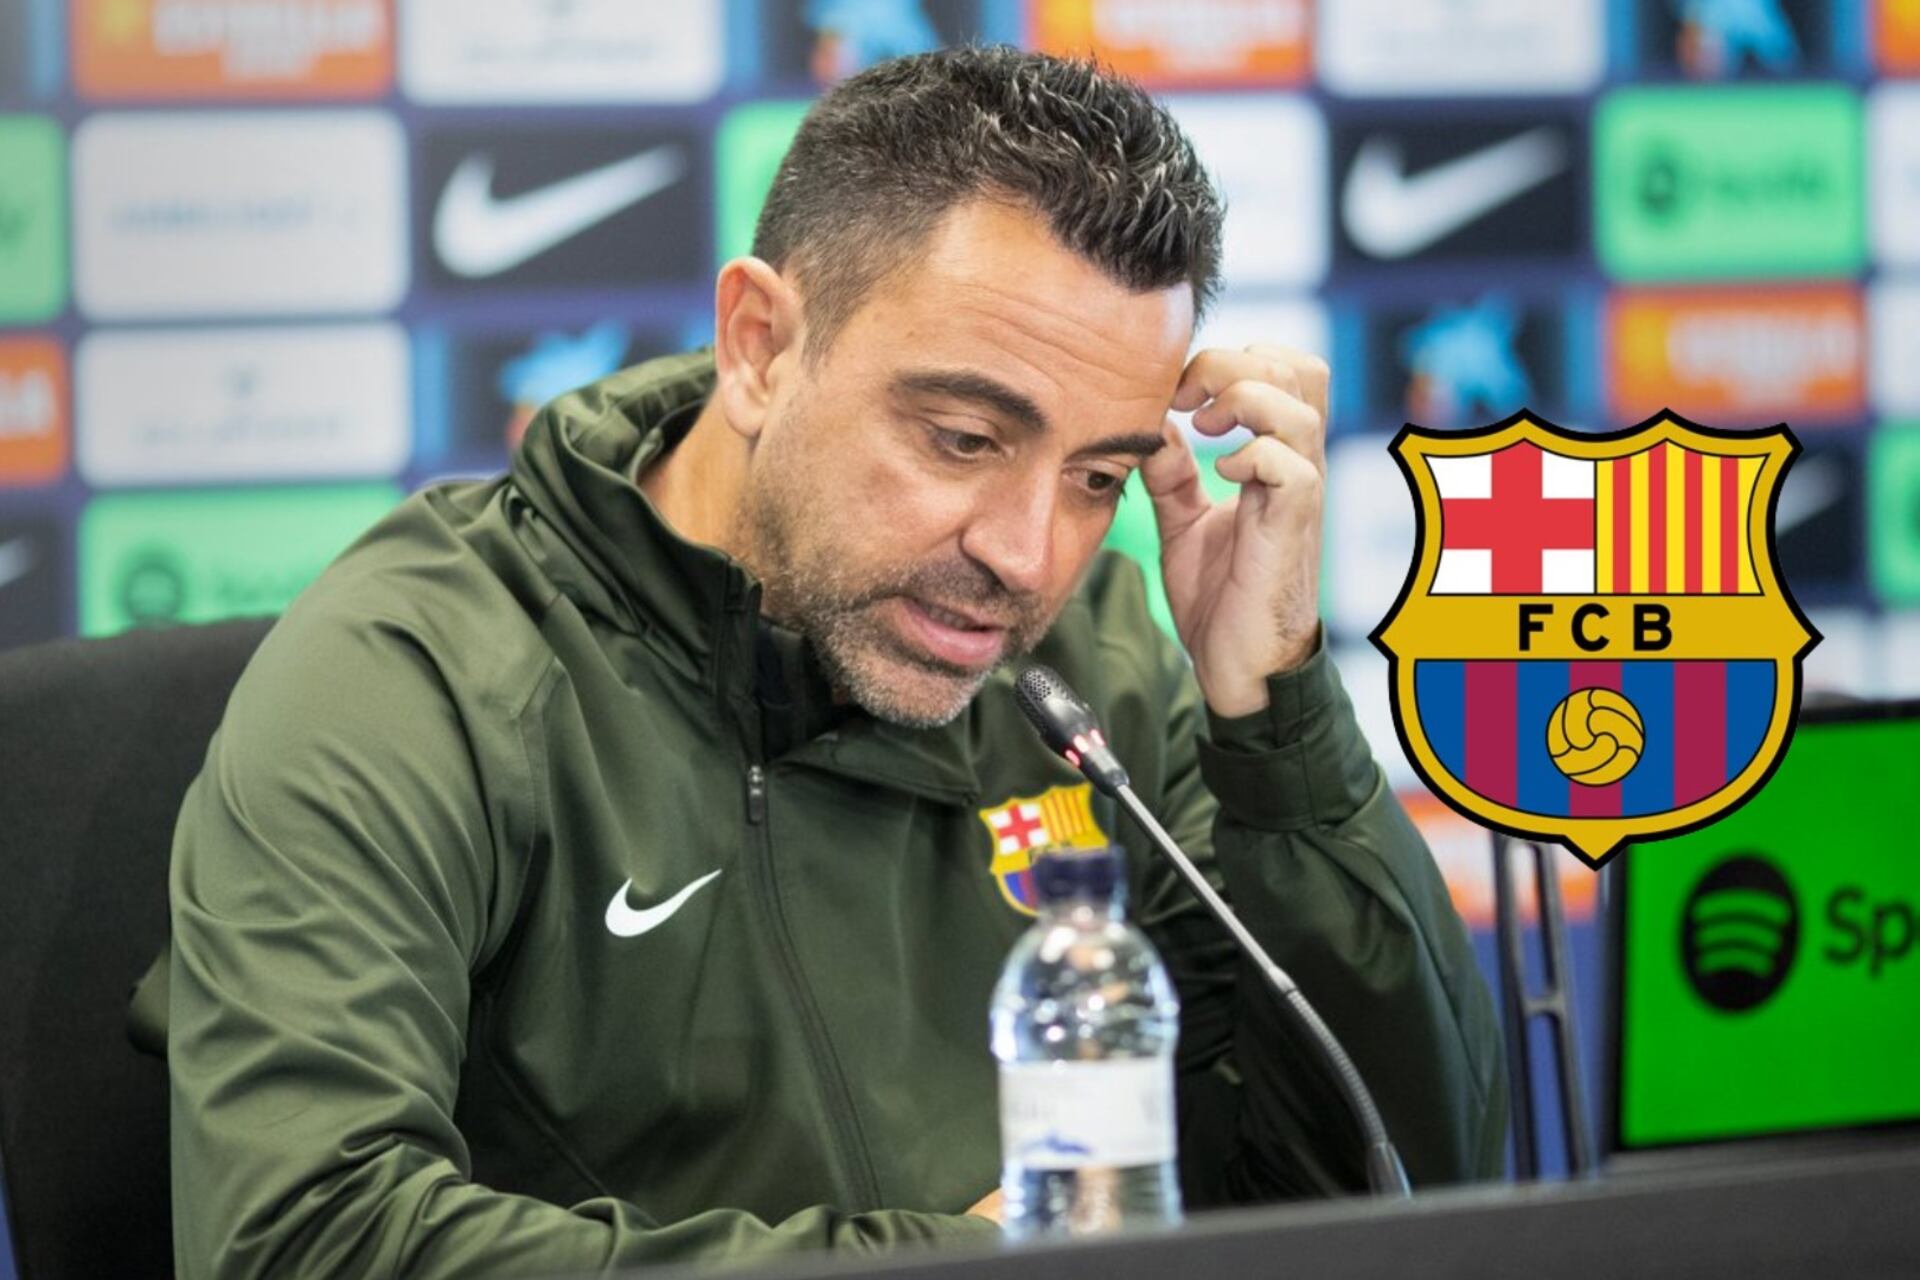 Besides losing an important amount of money for signings, the reason why firing Xavi wouldn’t be Barca’s best option